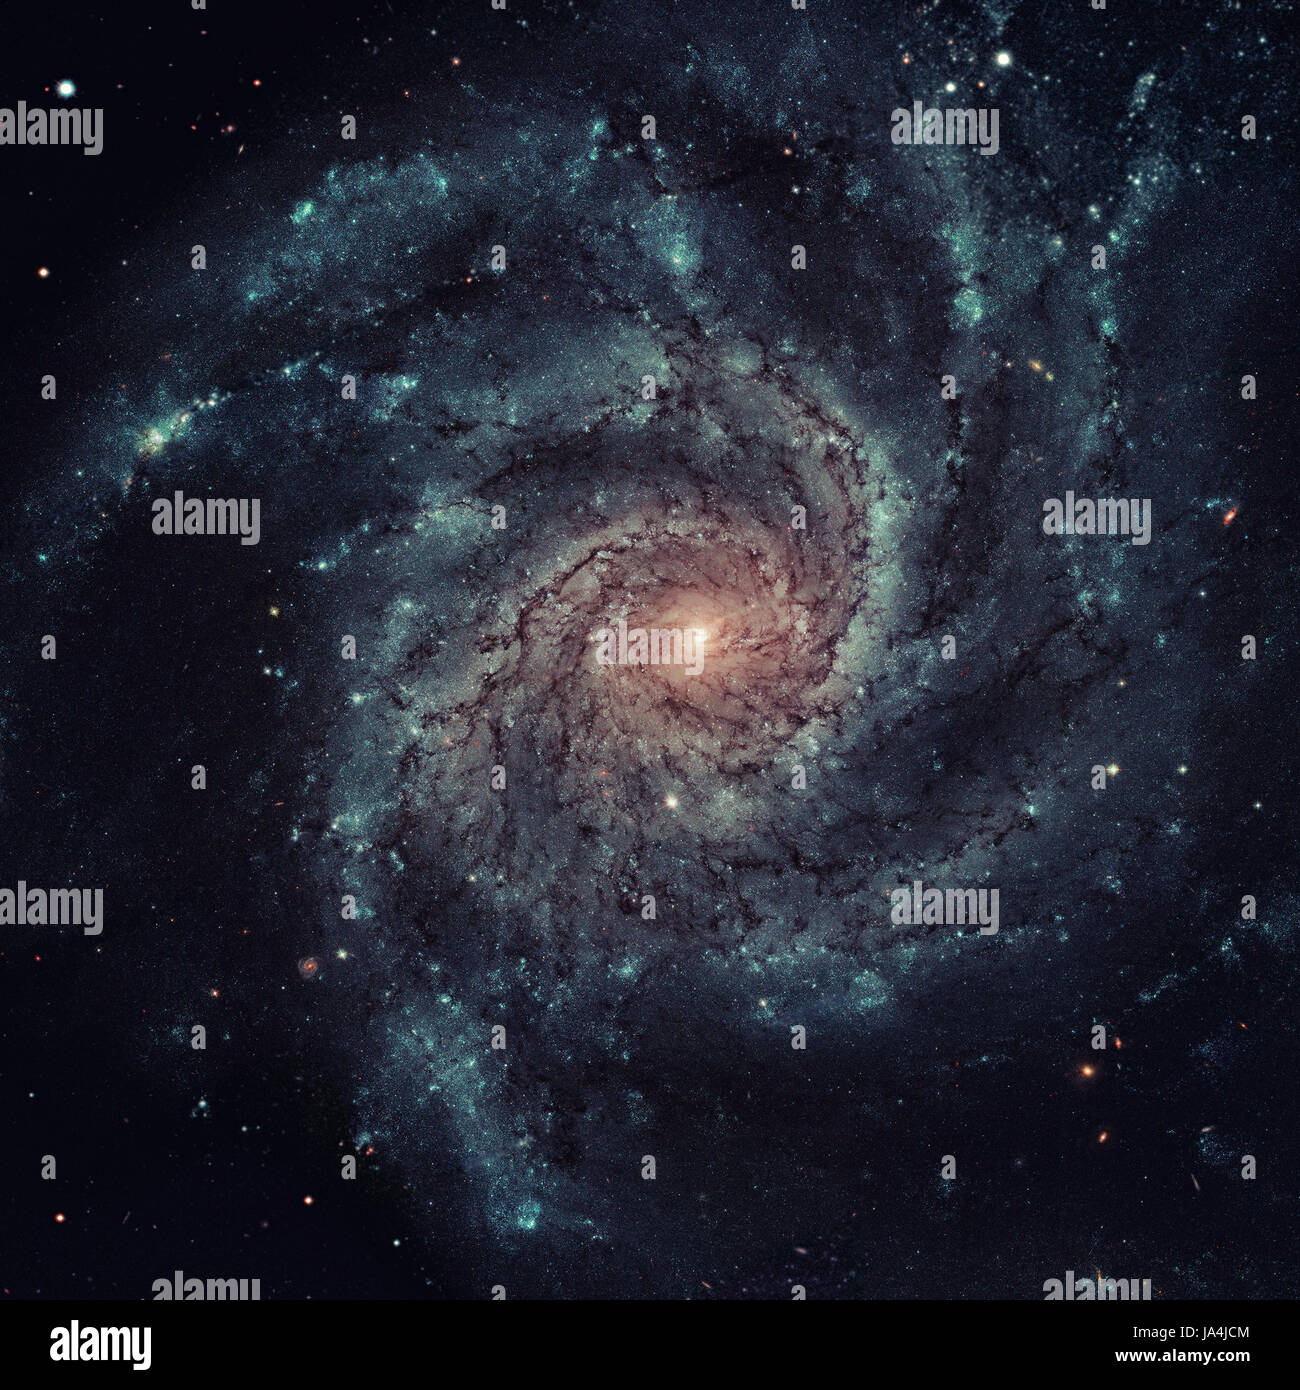 The Pinwheel Galaxy, also known as Messier 101, M101 or NGC 5457, is a face-on spiral galaxy in the constellation Ursa Major. Retouched image with sma Stock Photo